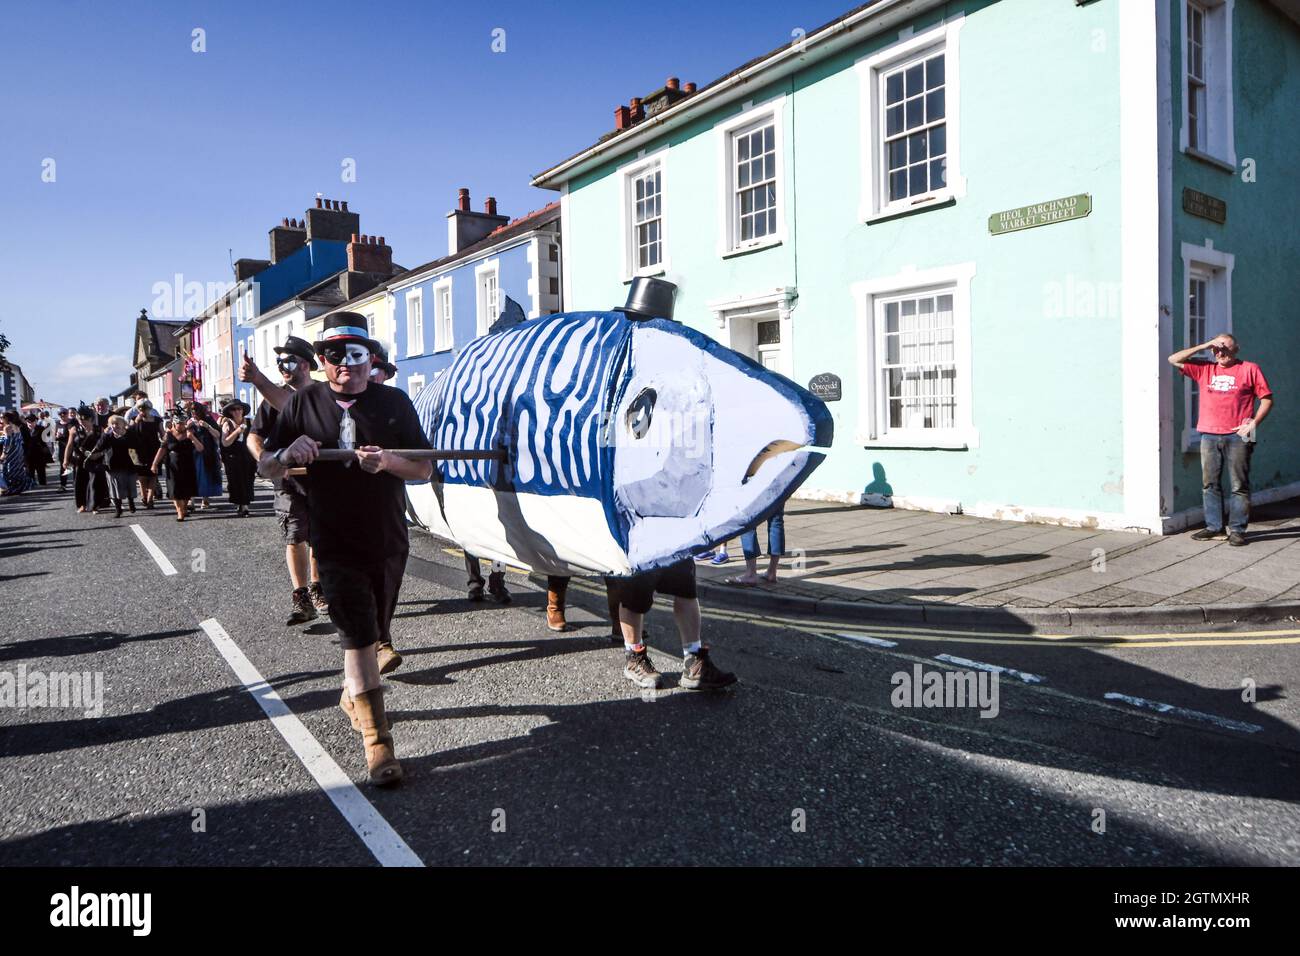 Aberaeron Mackerel Fiesta. There can’t be many fiestas where a funeral is the focus of the celebrations. And probably none where that funeral is for a Stock Photo